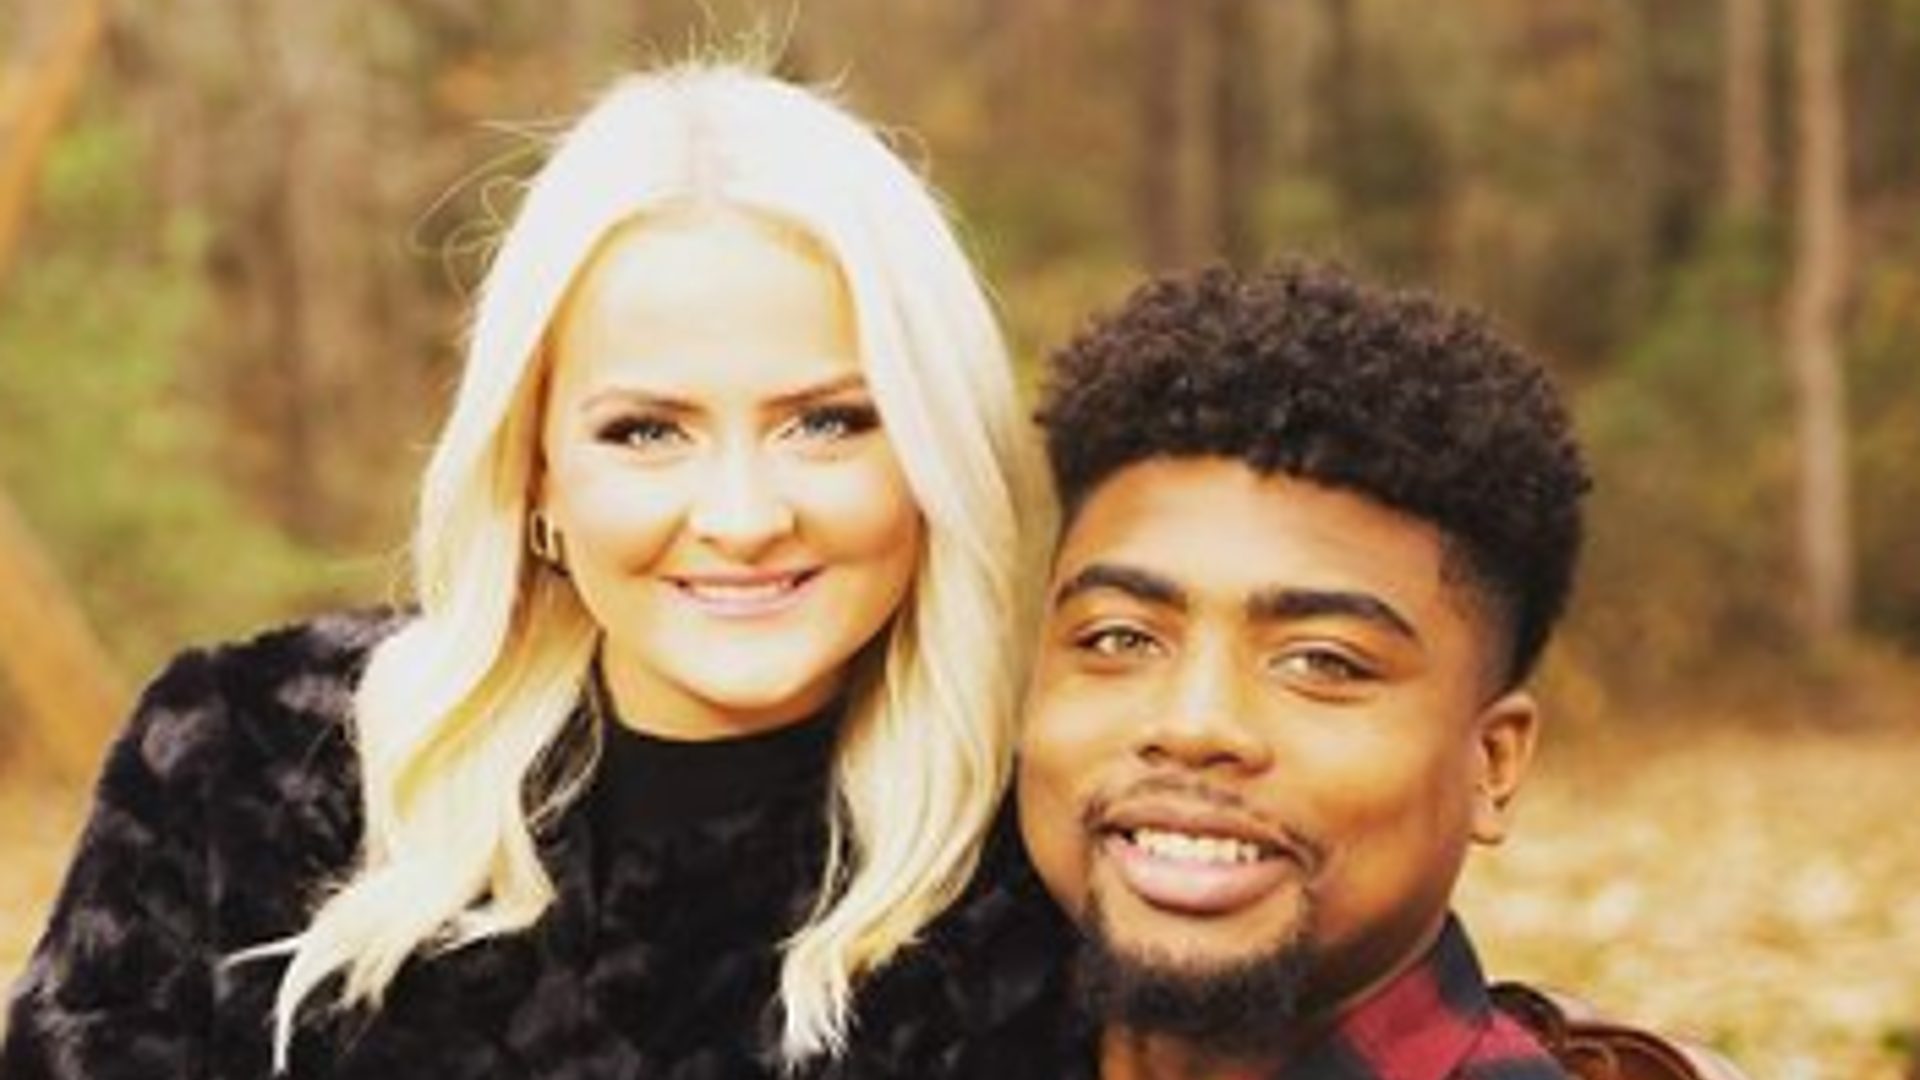 Who is Treylon Burks’s girlfriend? Know all about Shelby Pearlman